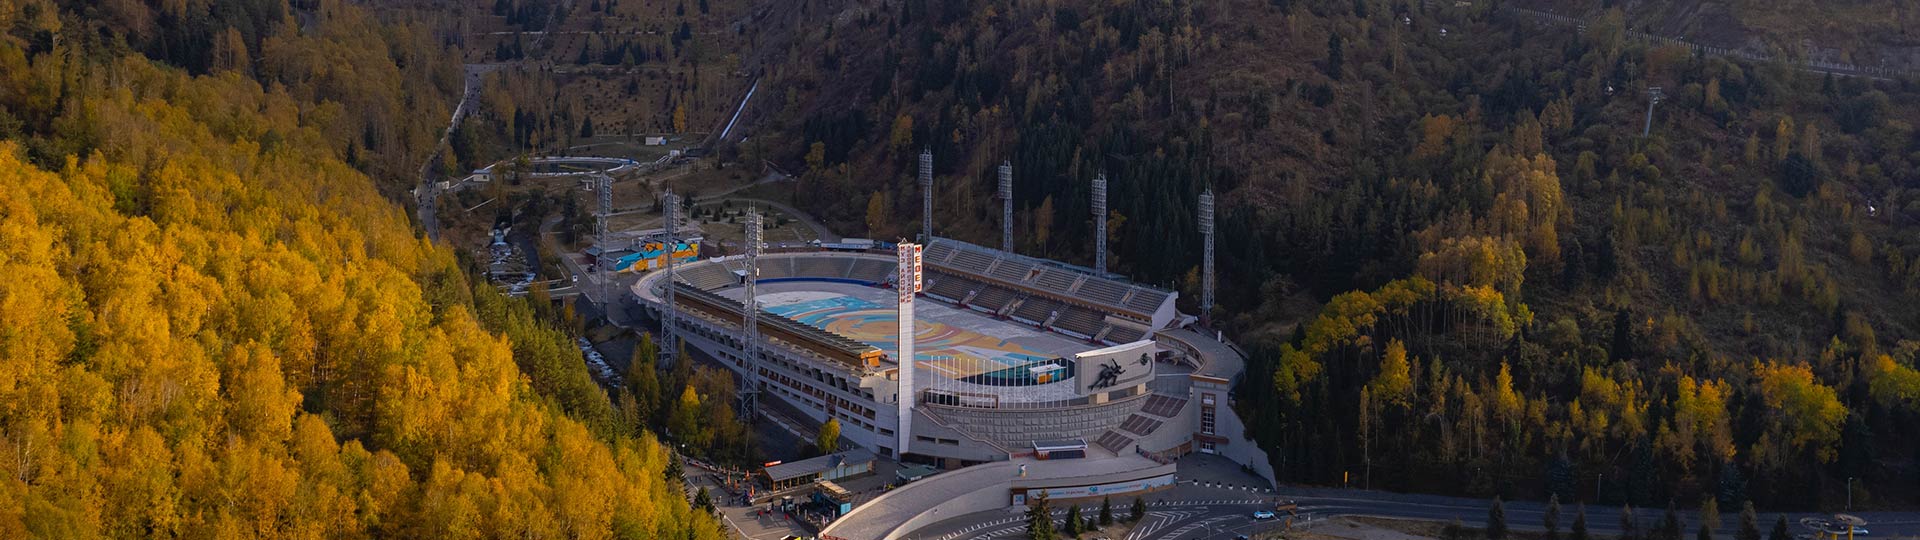 Aerial view of stadium situated in a valley